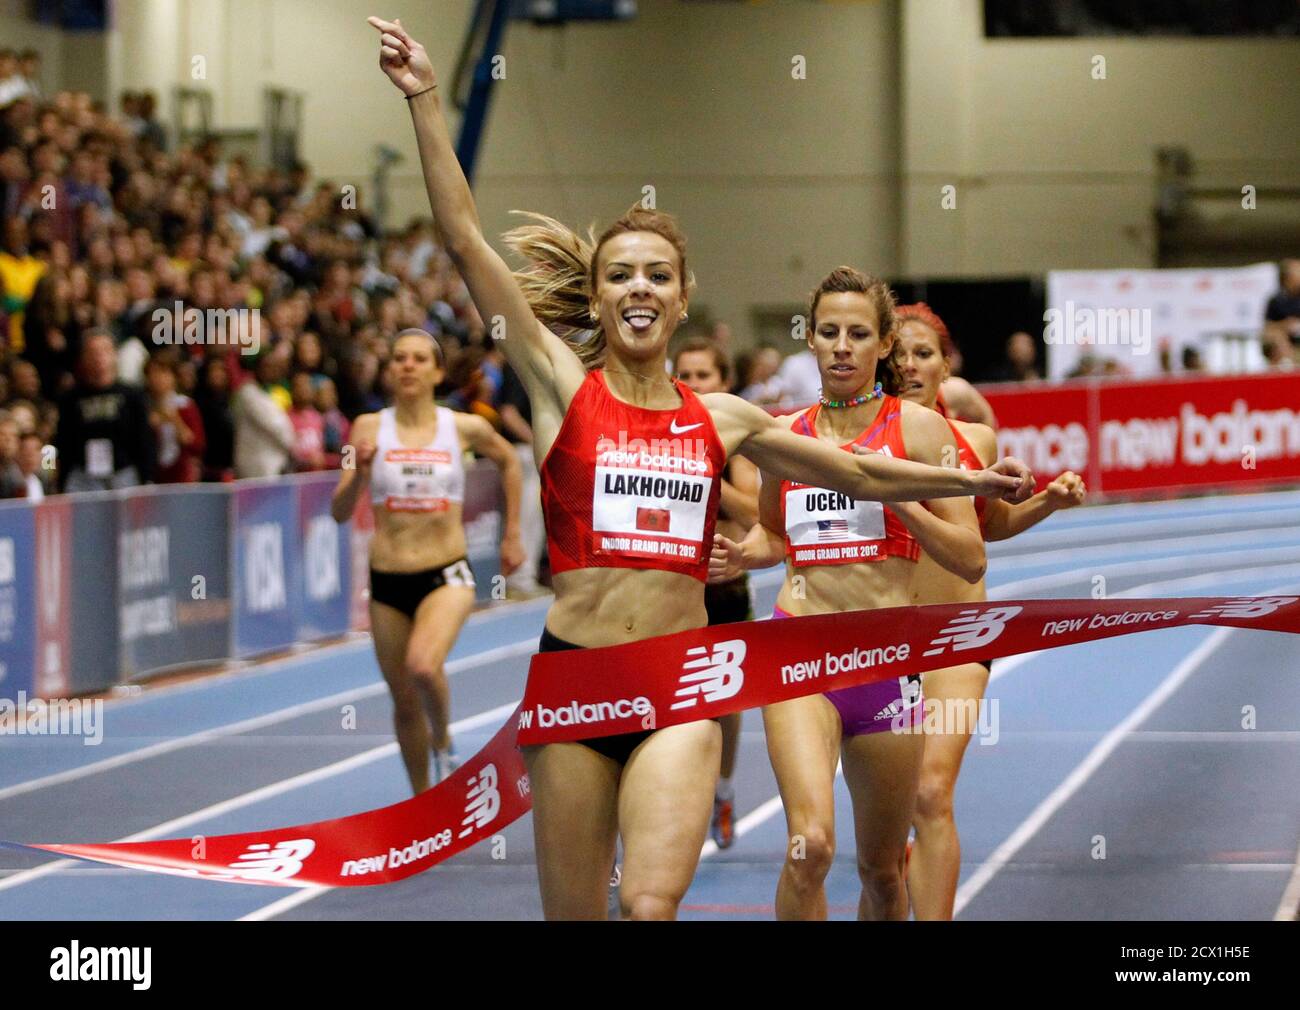 Morocco's Btissam Lakhouad (C) gestures as she crosses the finish line to  win the women's 1000 meter run at the New Balance Indoor Grand Prix track  meet in Boston, Massachusetts February 4,